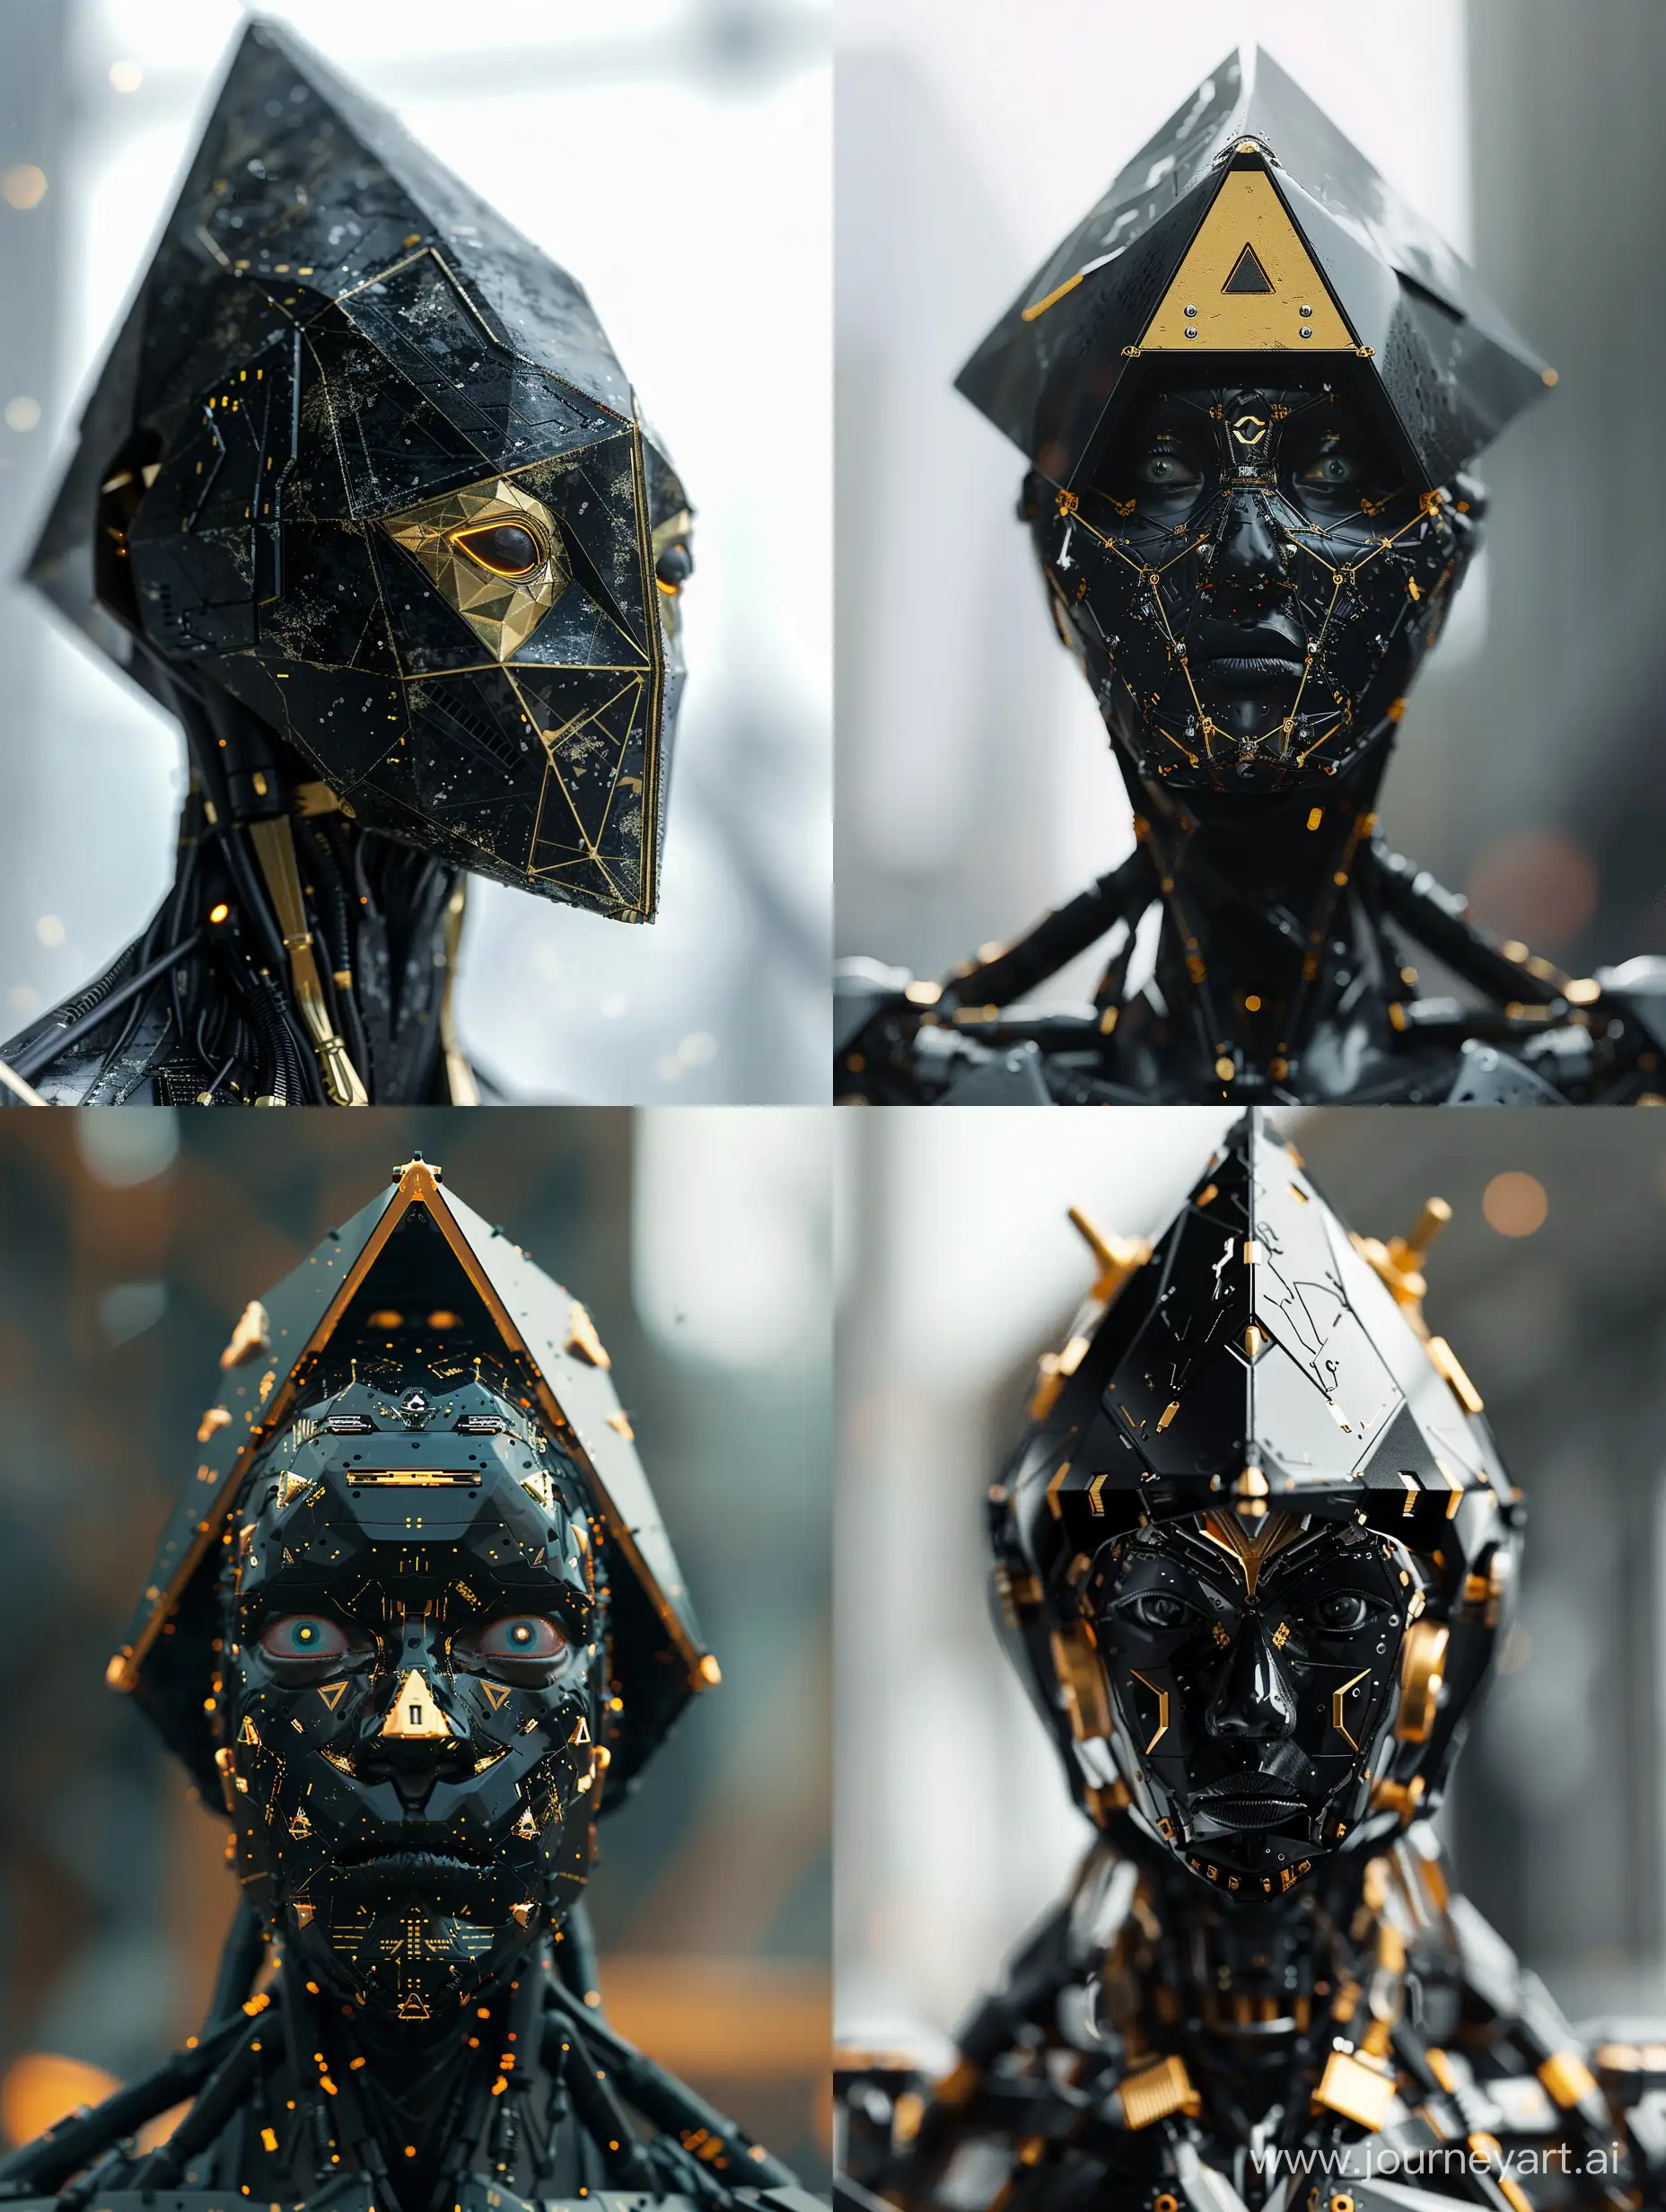 Cinematic-Black-and-Gold-Cybnetic-Warrior-with-Alien-Cybernetic-Enhancements